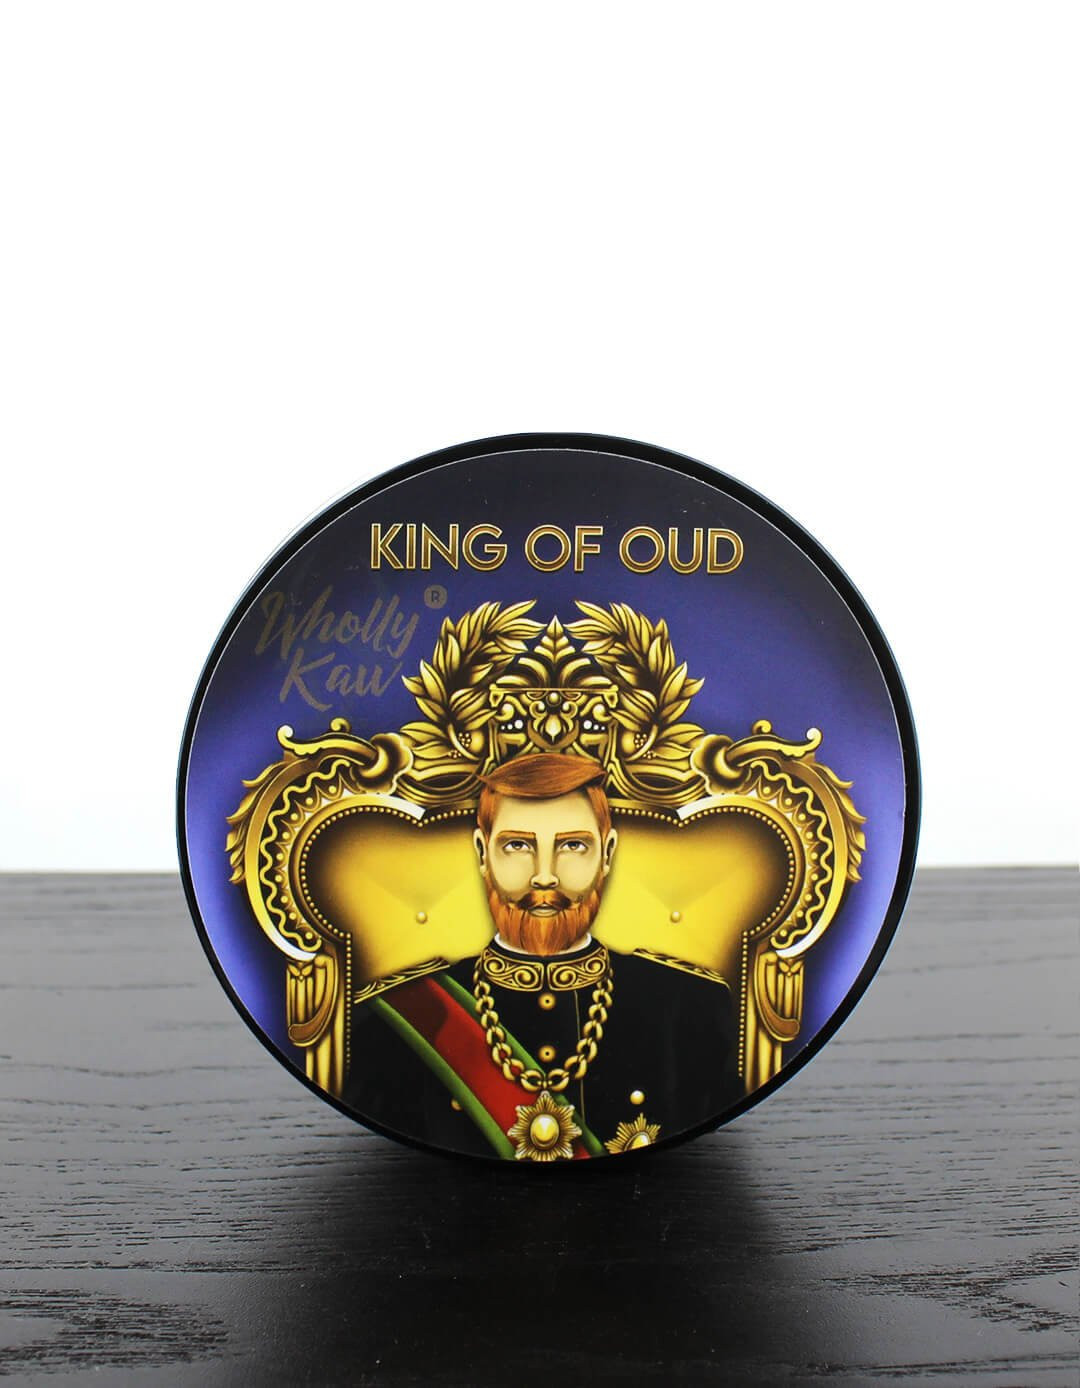 Wholly Kaw Shaving Soap, King of Oud (New)